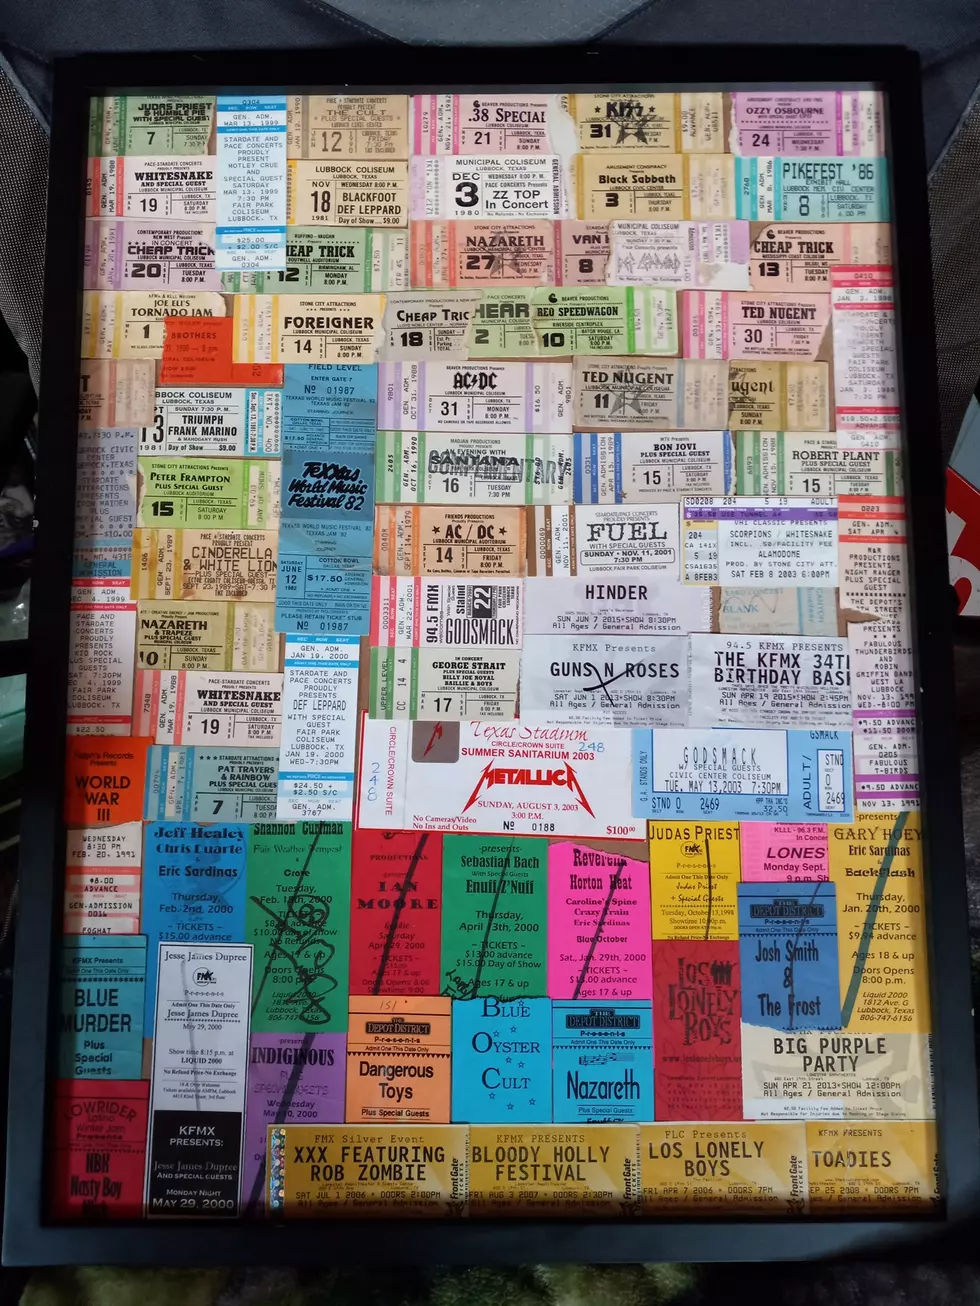 You Absolutely Cannot Beat This Collection of Lubbock Concert Tickets